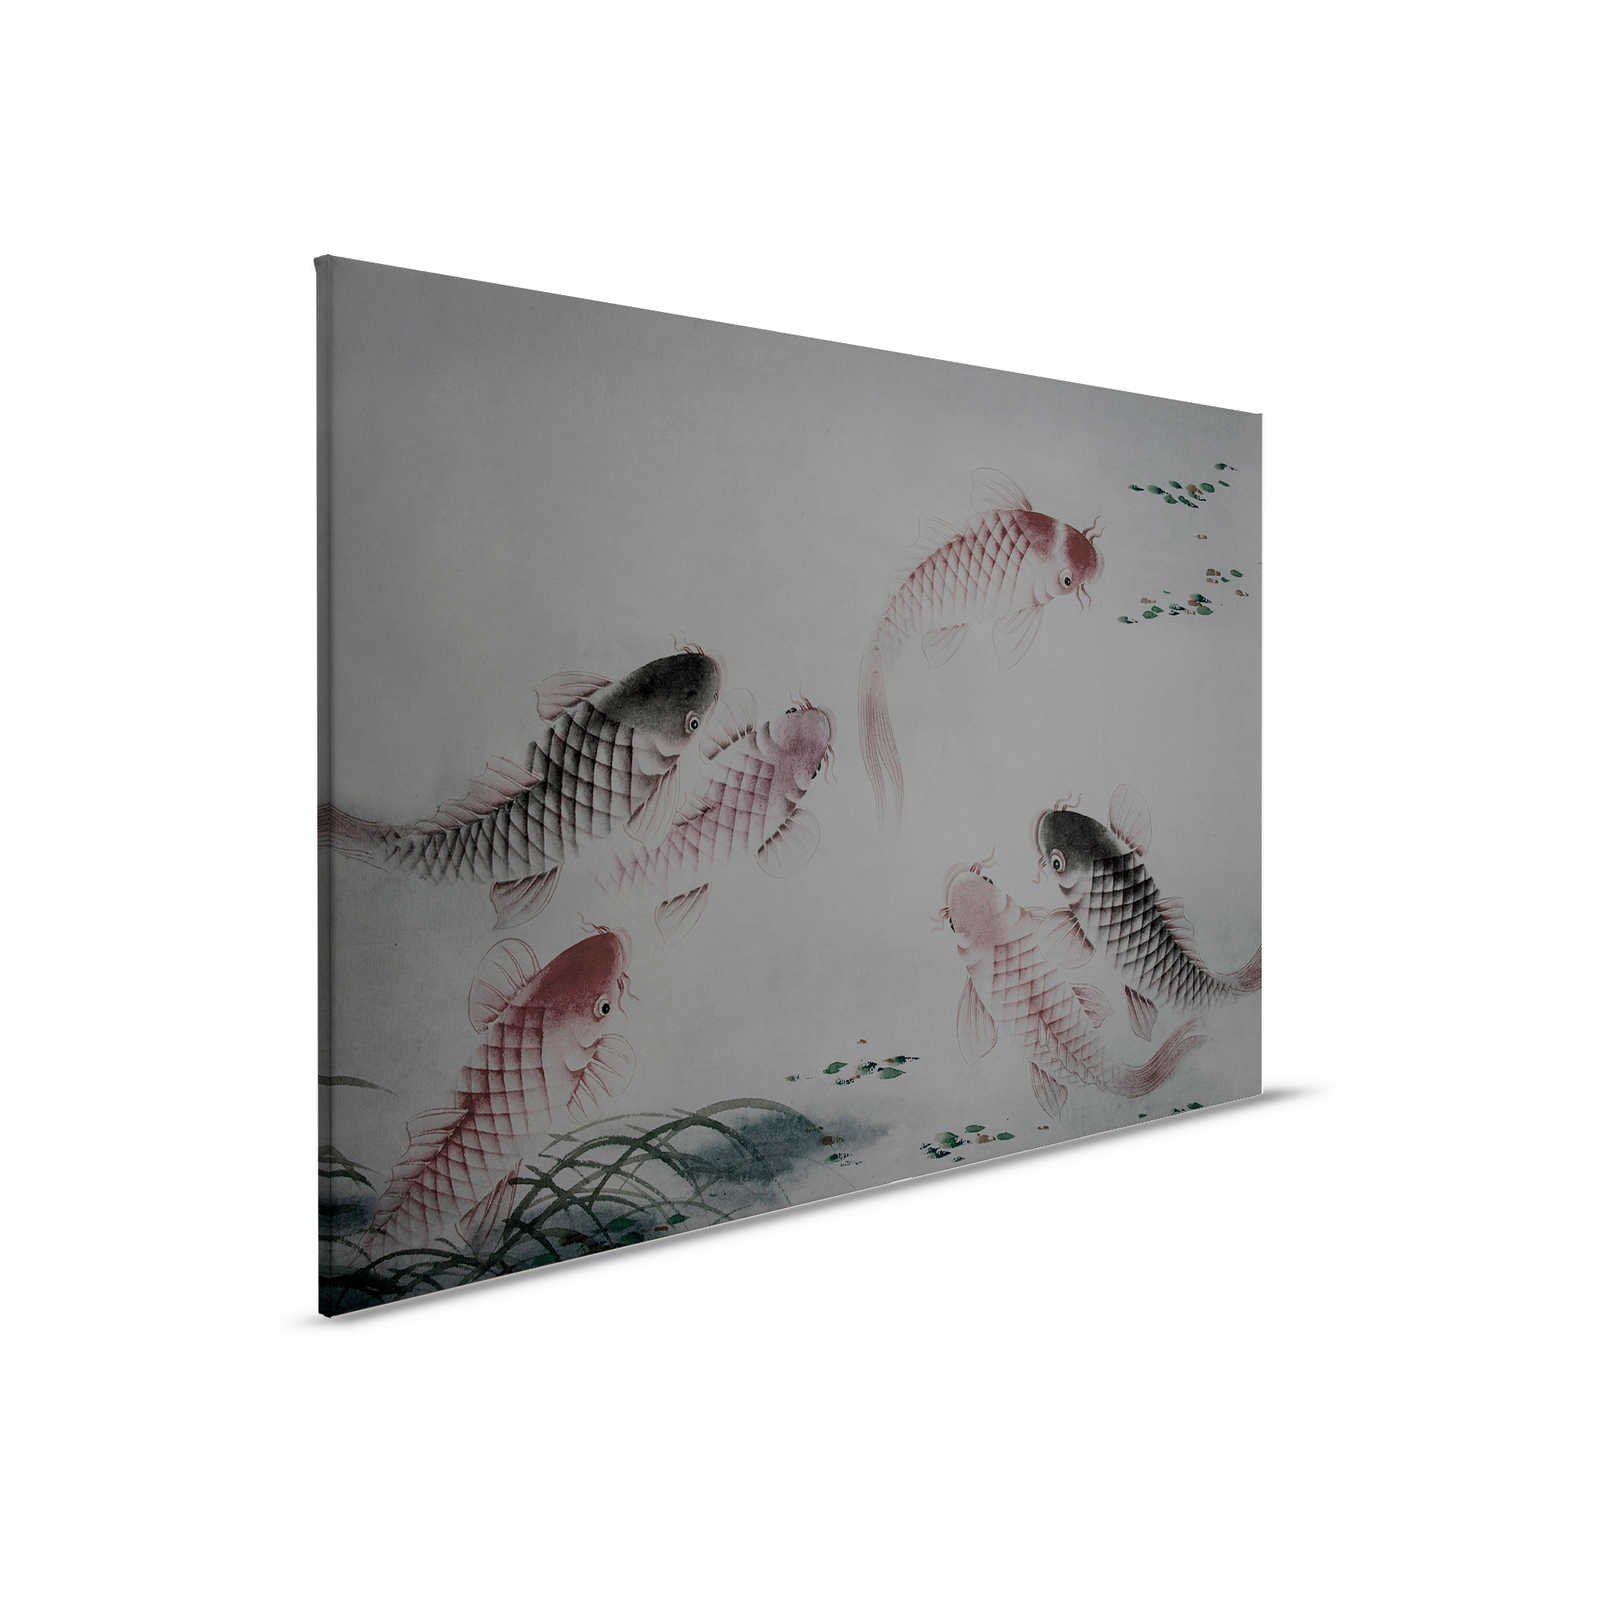         Canvas painting Asia Style with Koi pond | grey - 0,90 m x 0,60 m
    